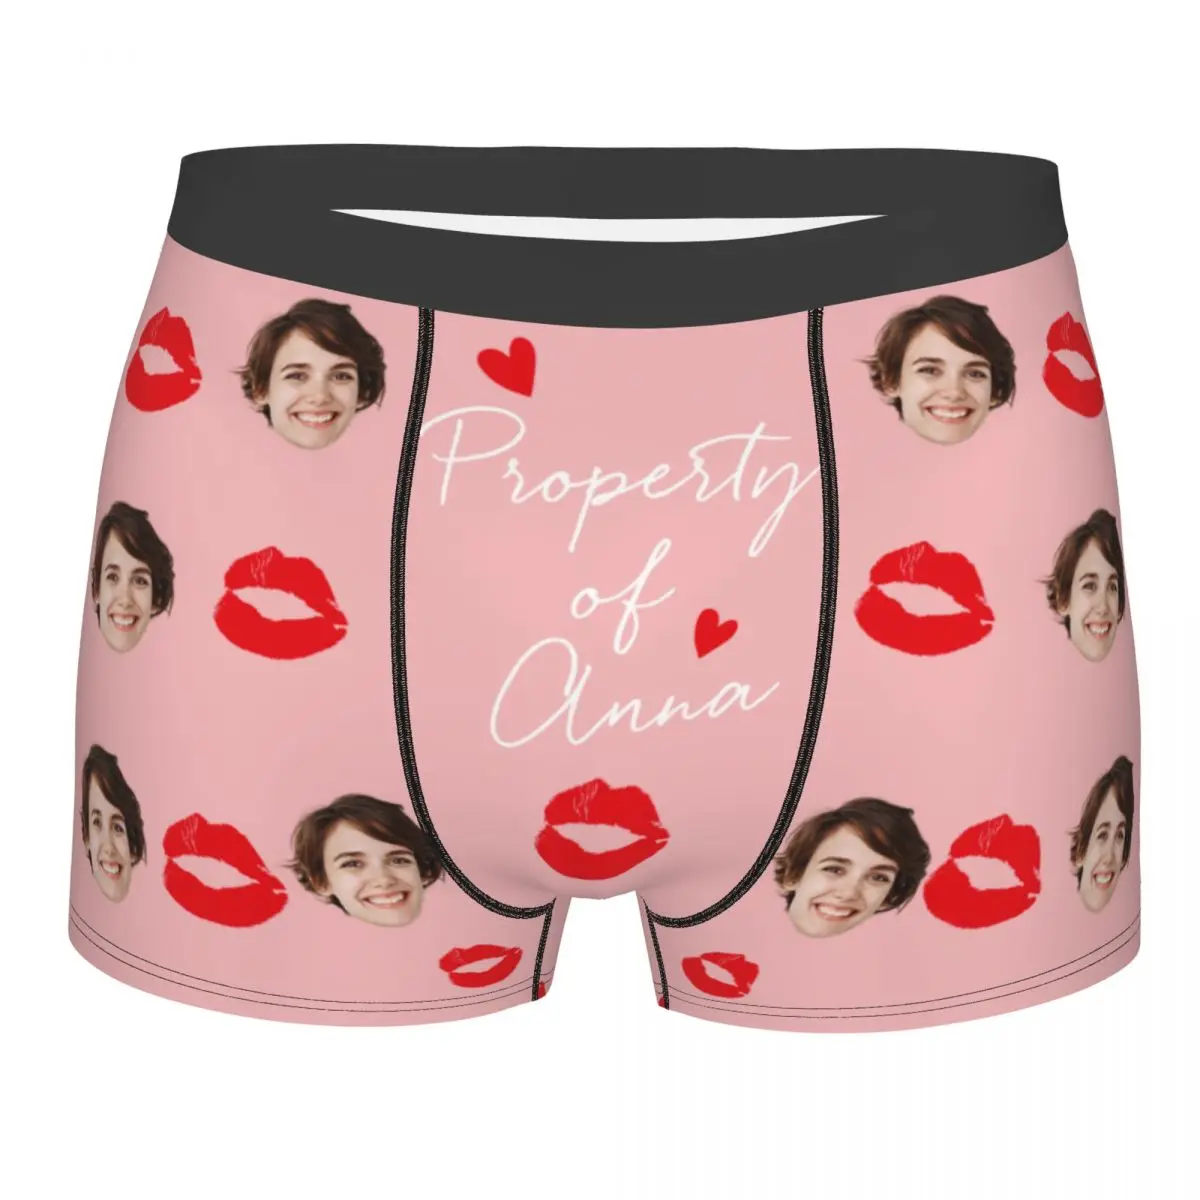 

Custom Underwear Personalized for Men Boyfriend Husband Boxer Briefs with Photo Face Valentines Day Gifts for Him